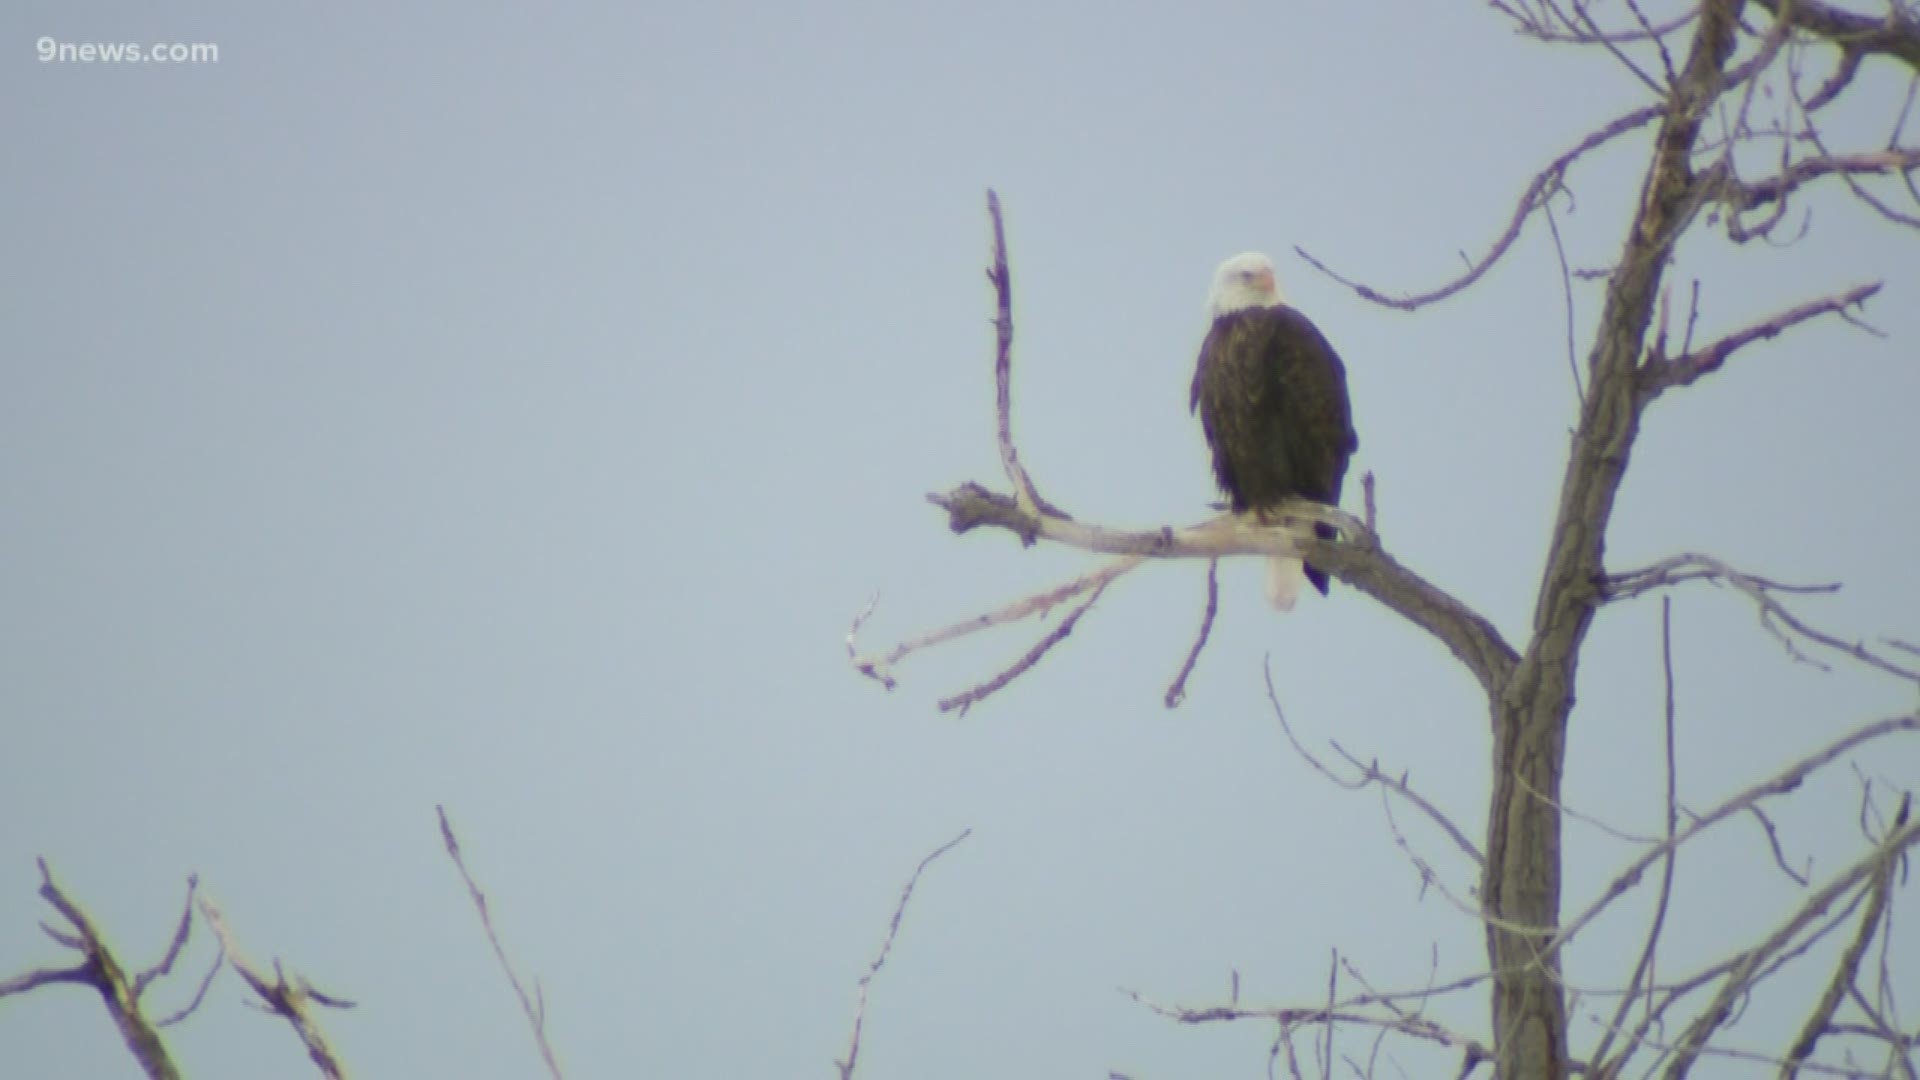 116 bald eagles were seen during a five-minute count at Barr Lake State Park Monday morning, according to Colorado Parks and Wildlife.